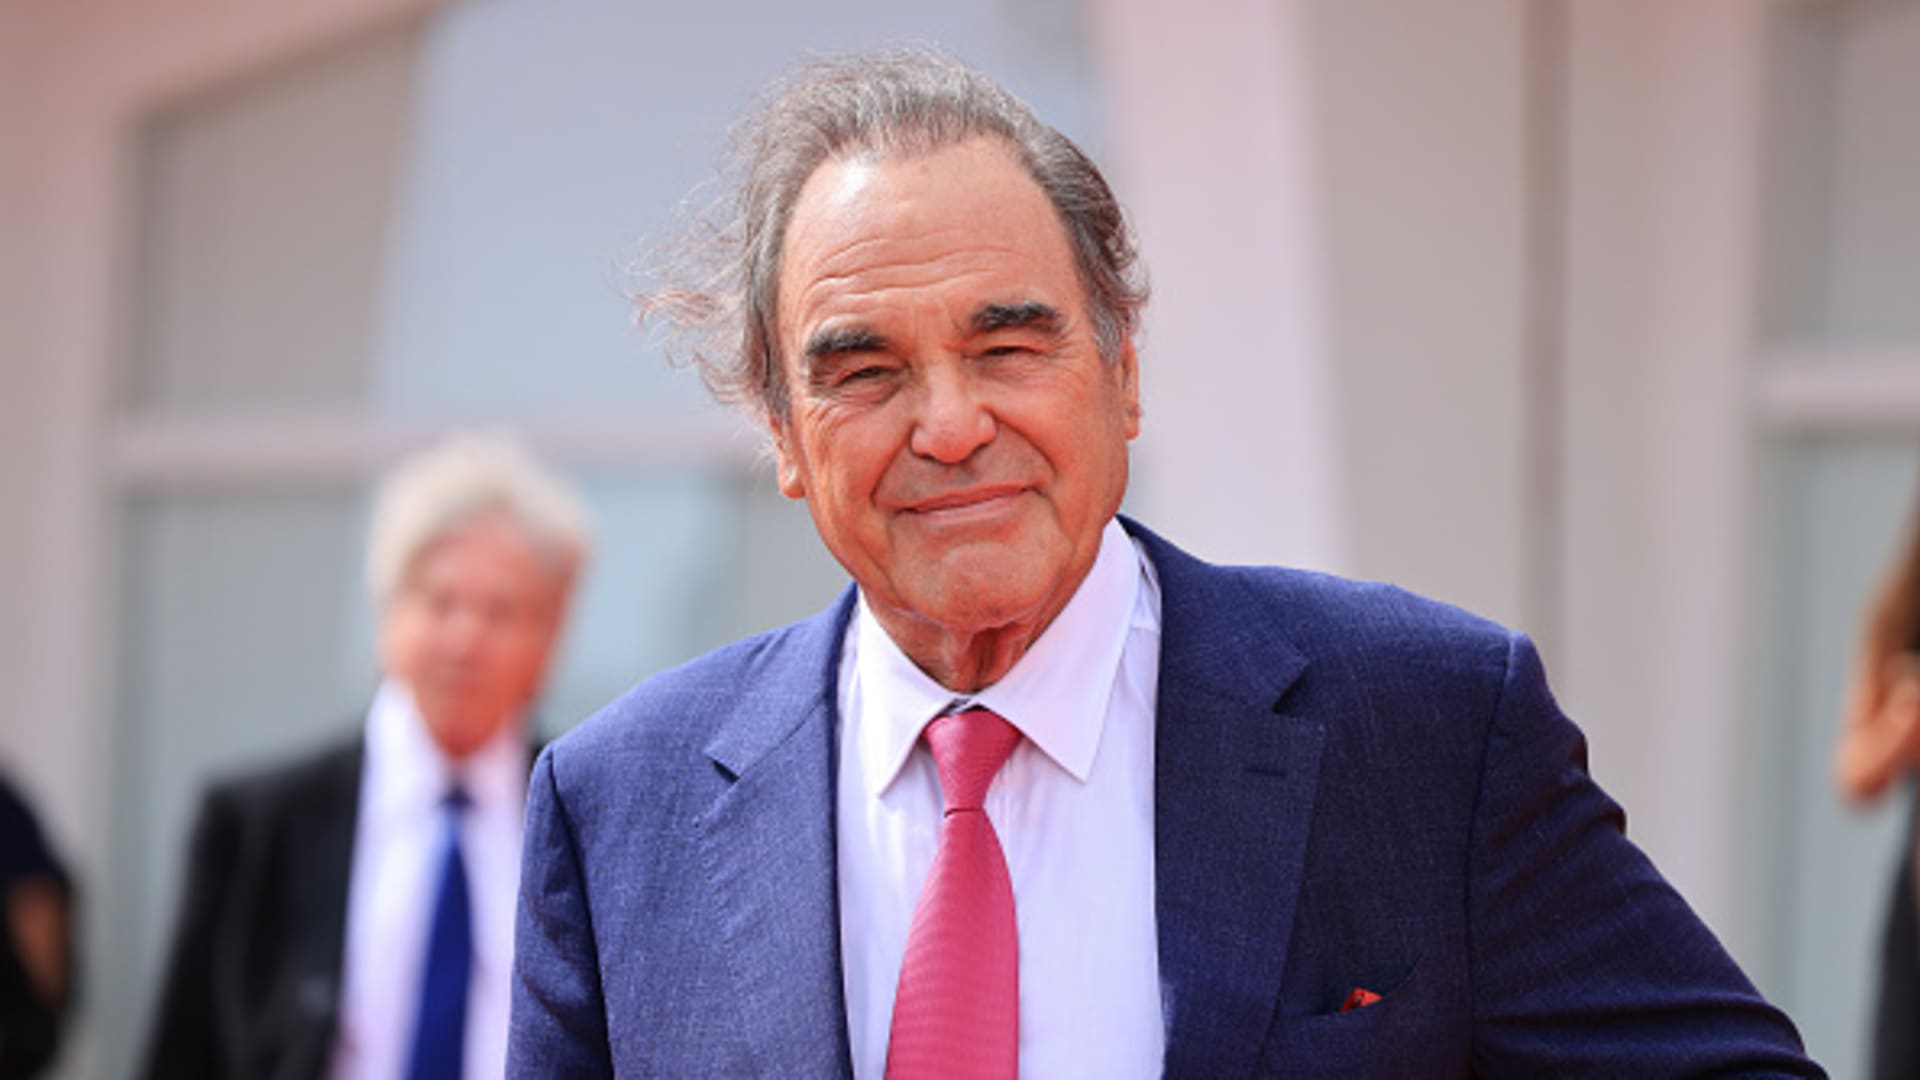 Oliver Stone Sounds Off on 'Idiots' in Showbiz, 'Nuclear Now' Doc